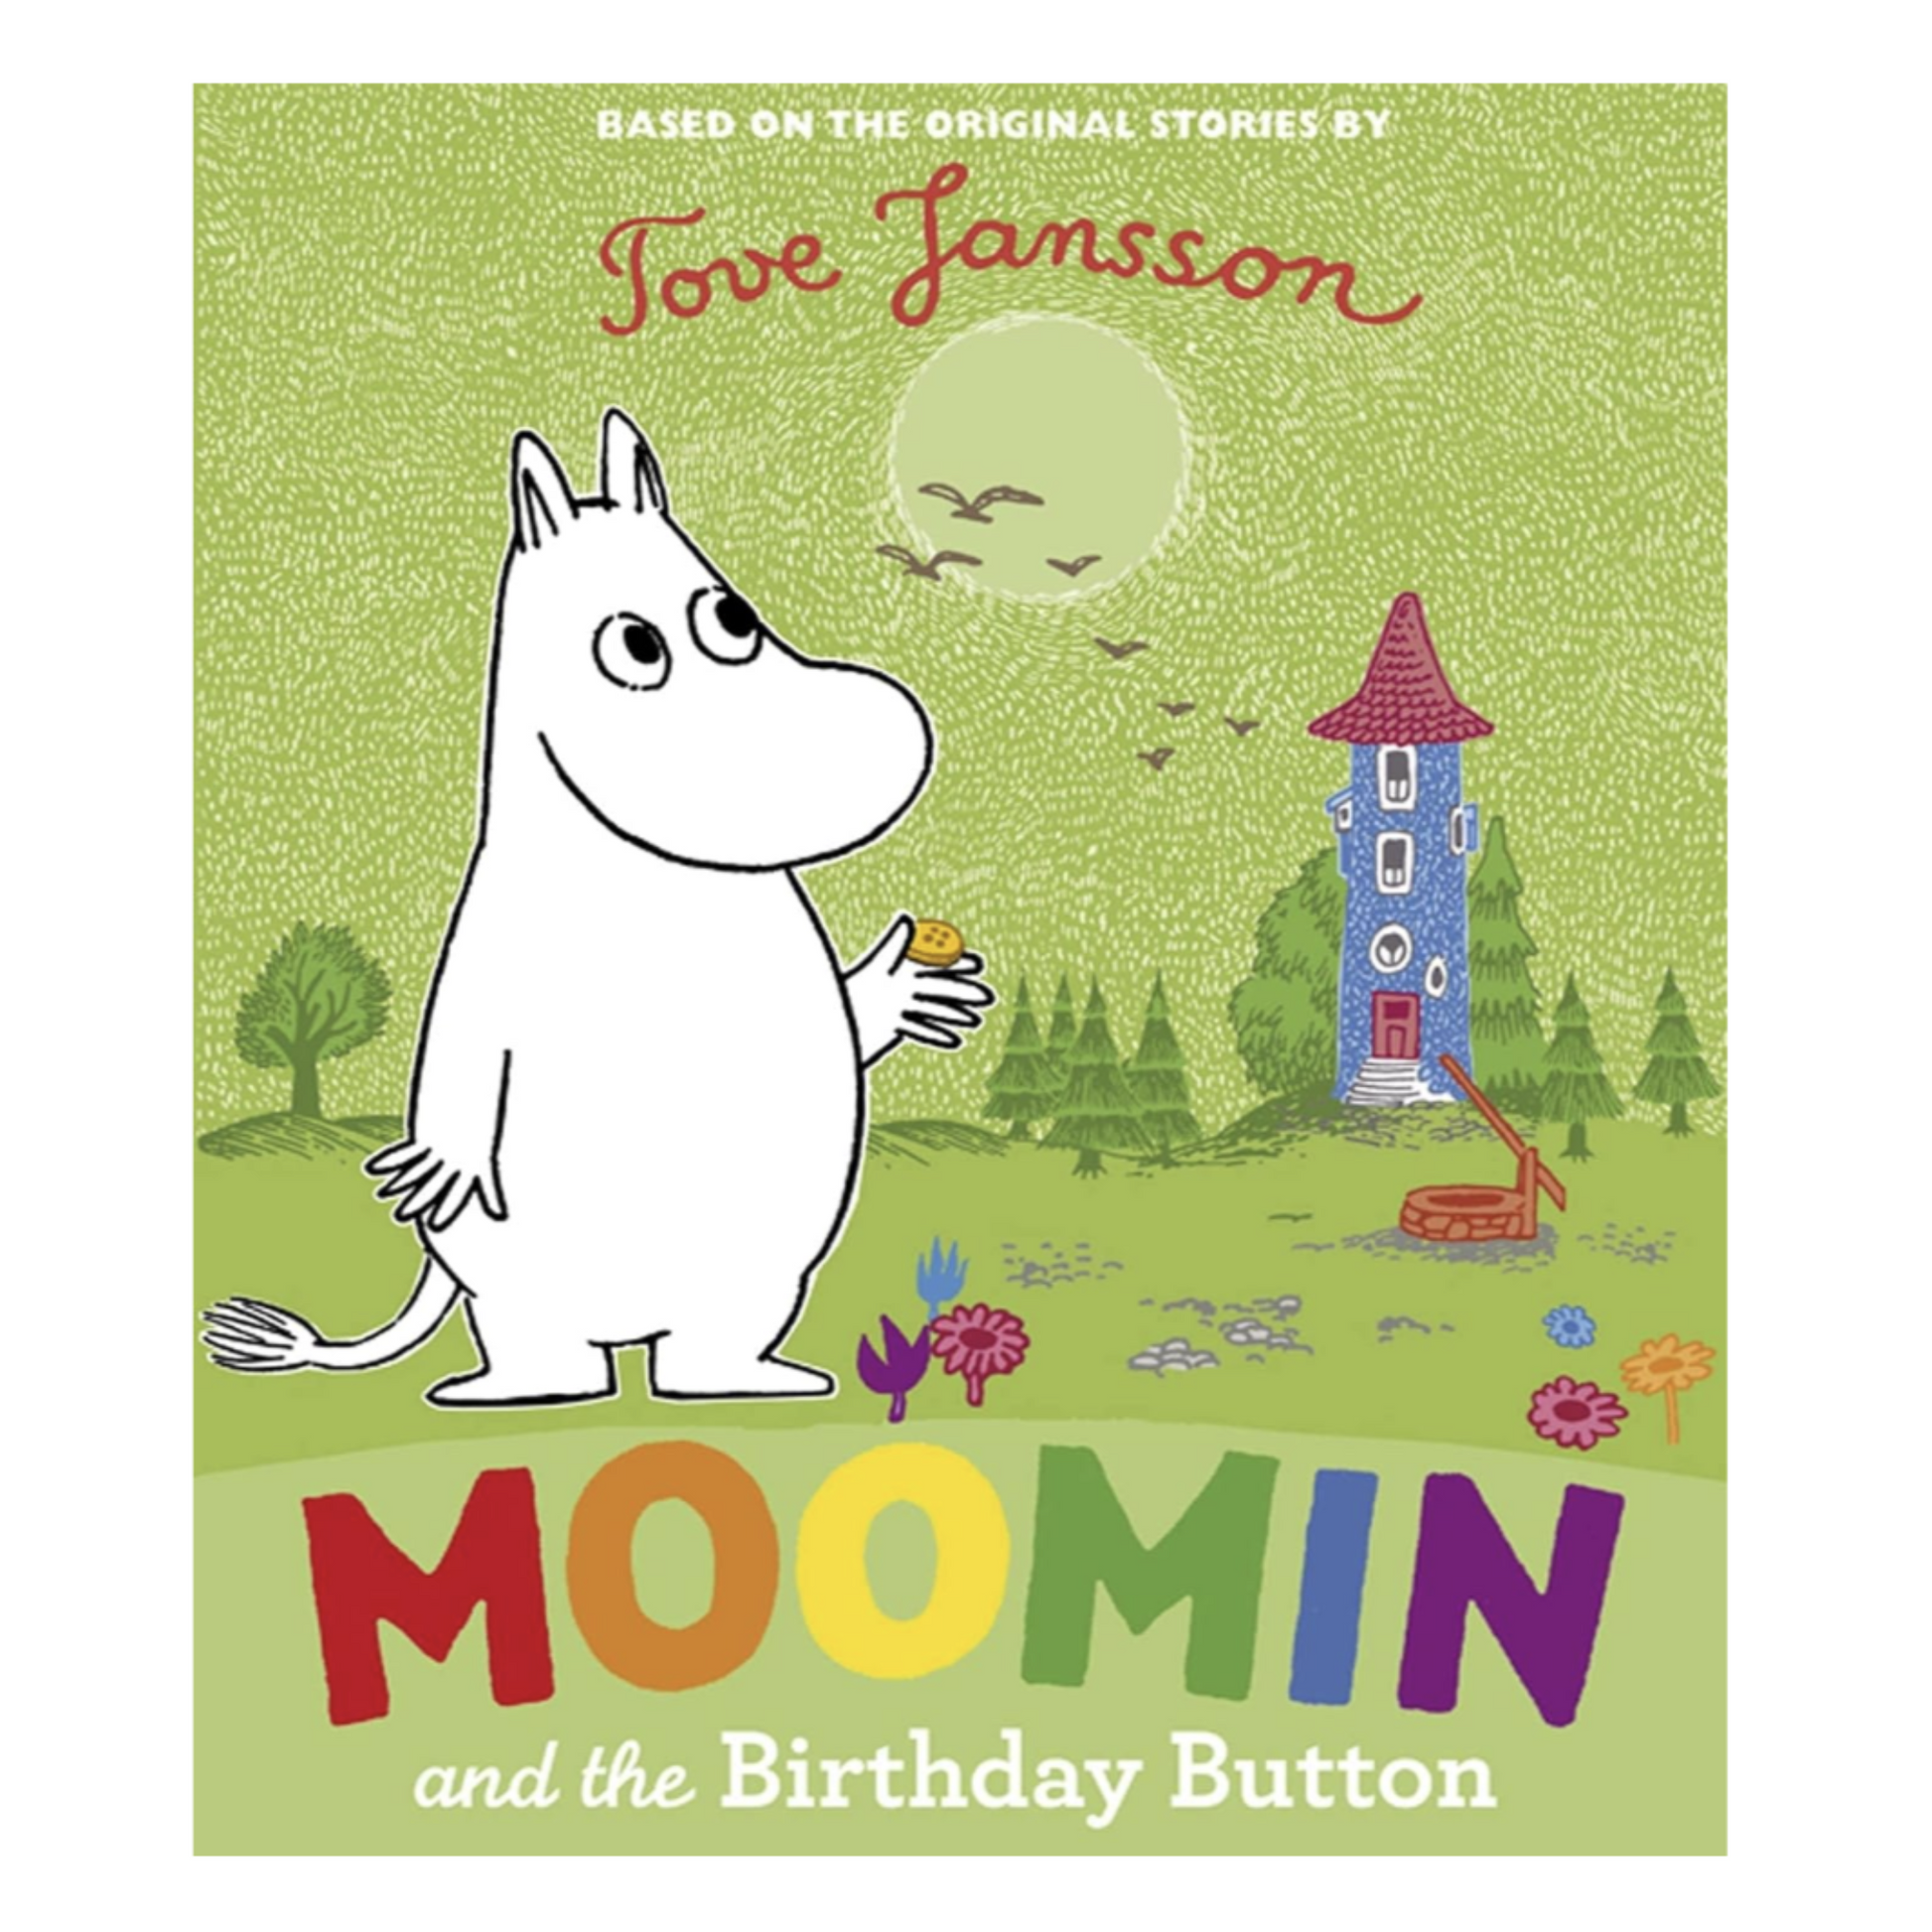 Moomin and the Birthday Button (8918284828959)